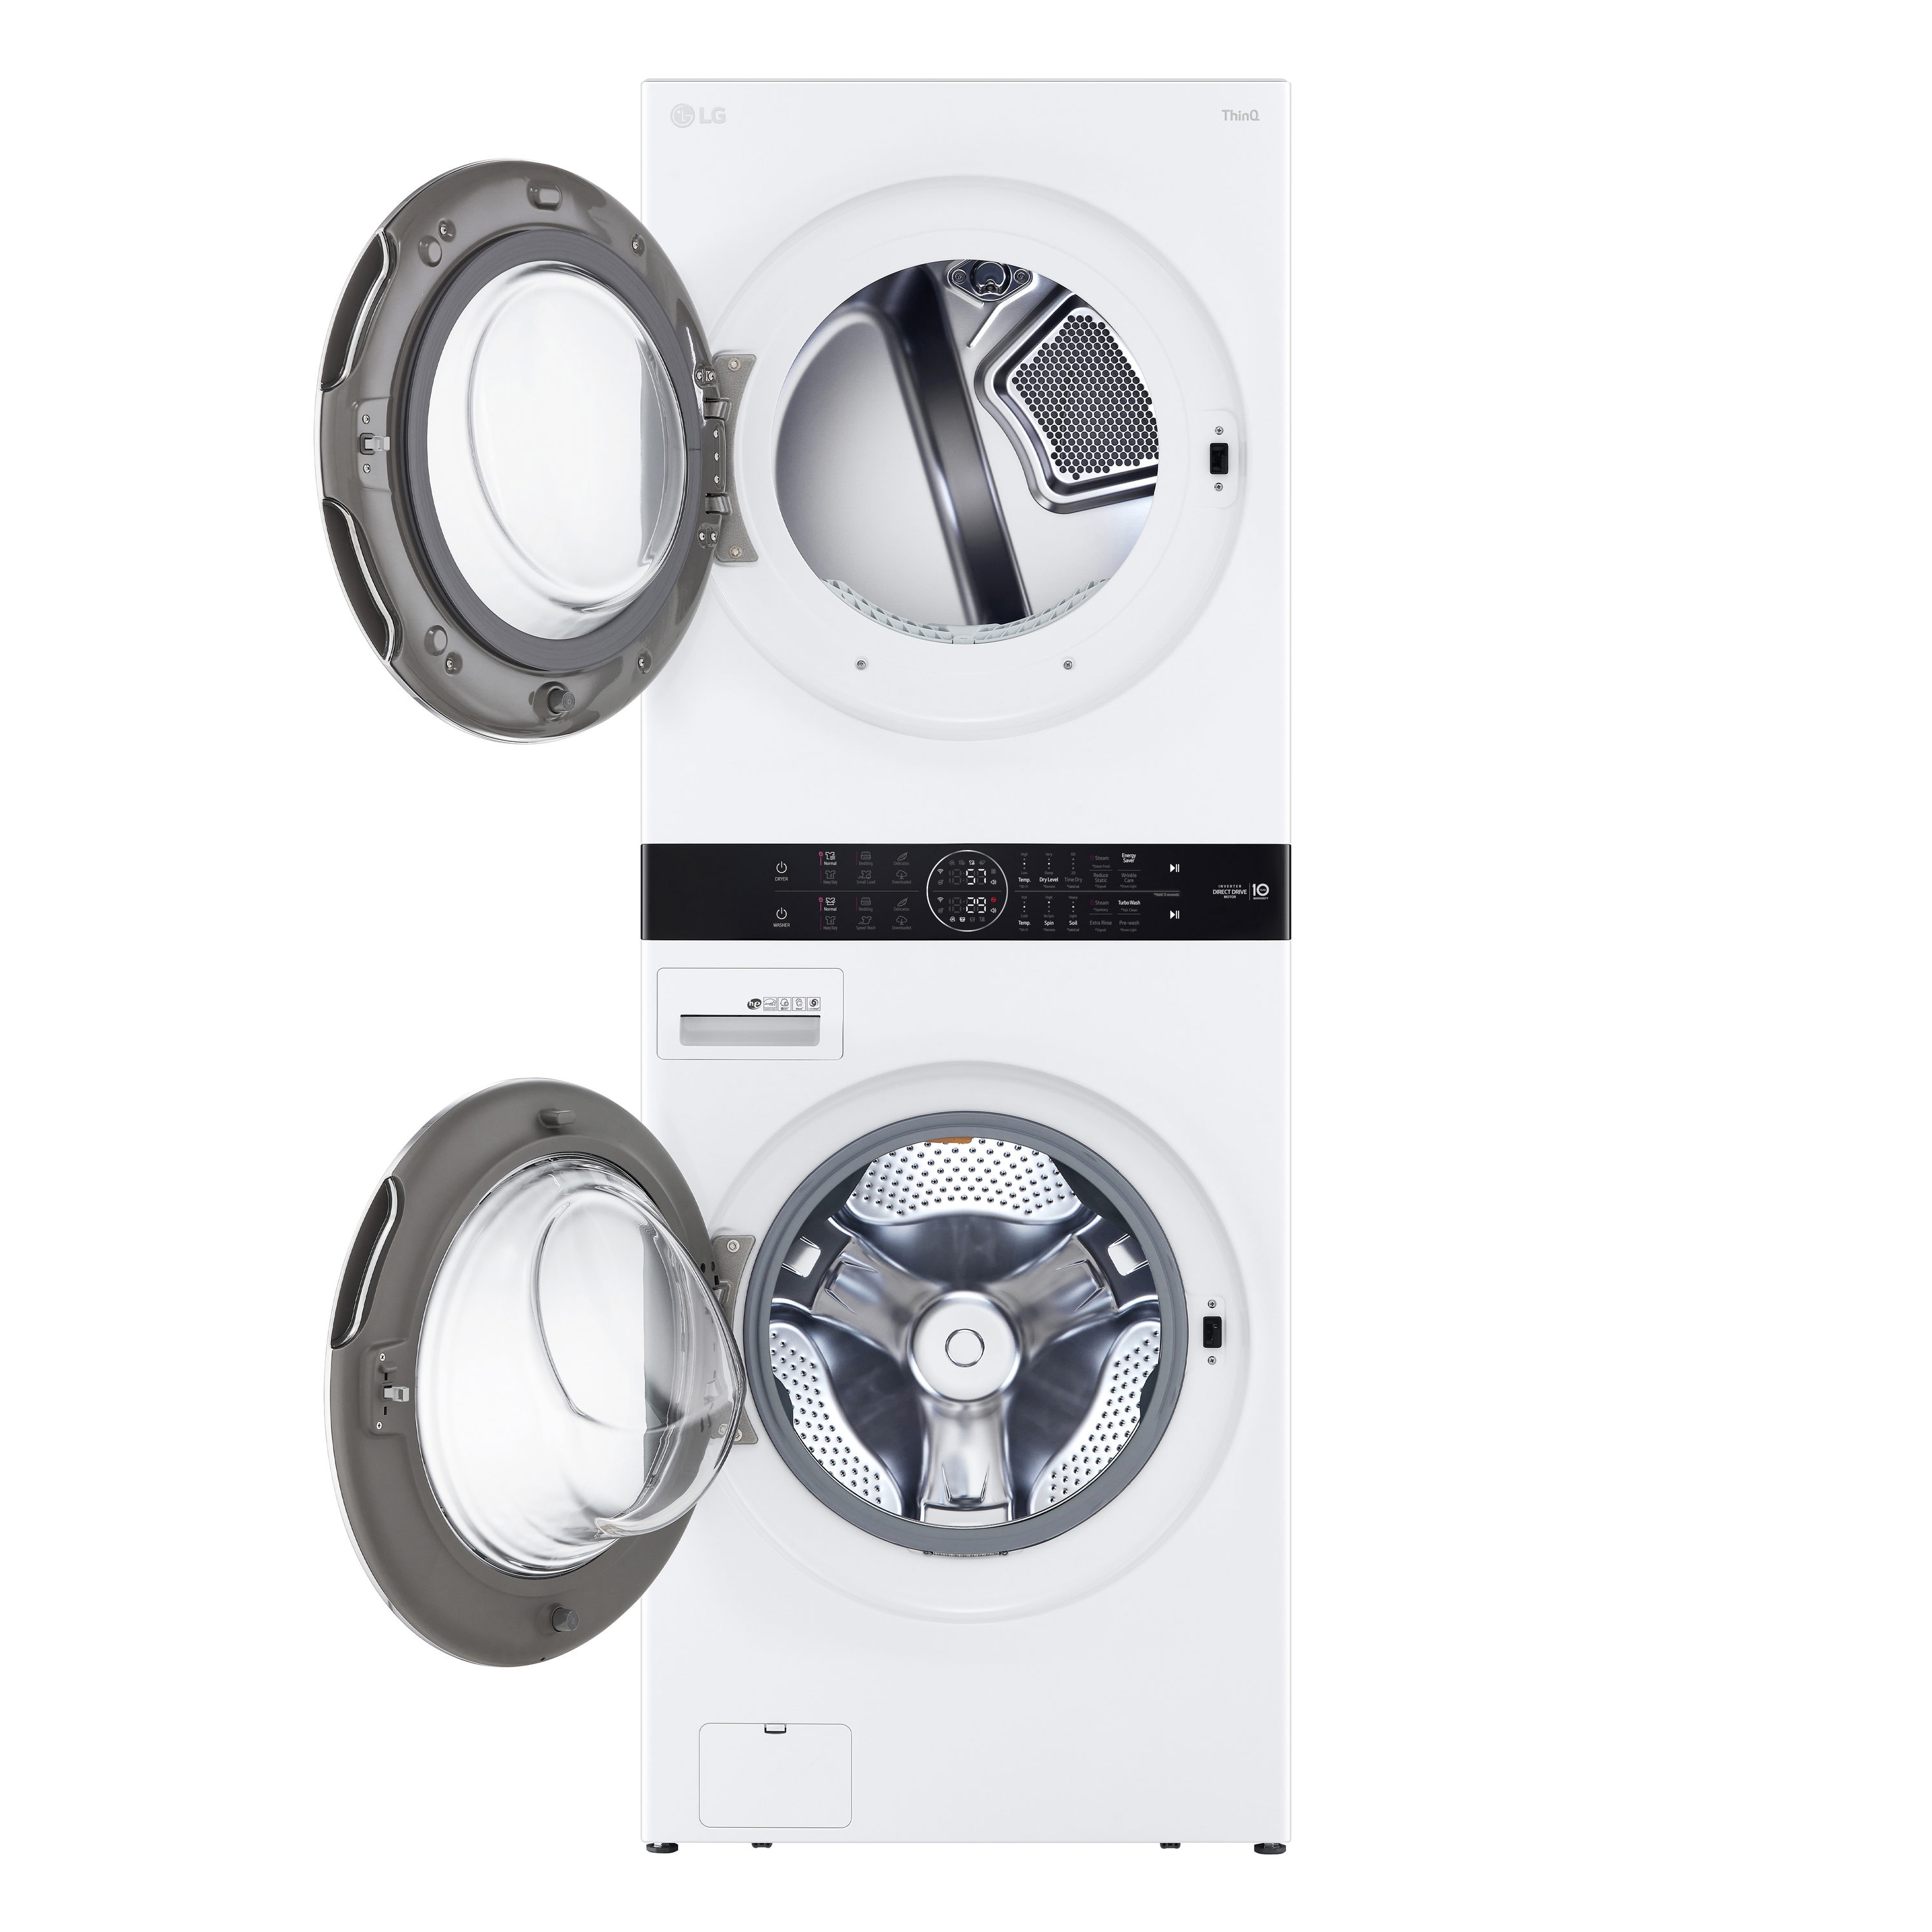 Steam Dryer with Unit Single Washer LG White & at Care Washtower system Center Styler Shop Control